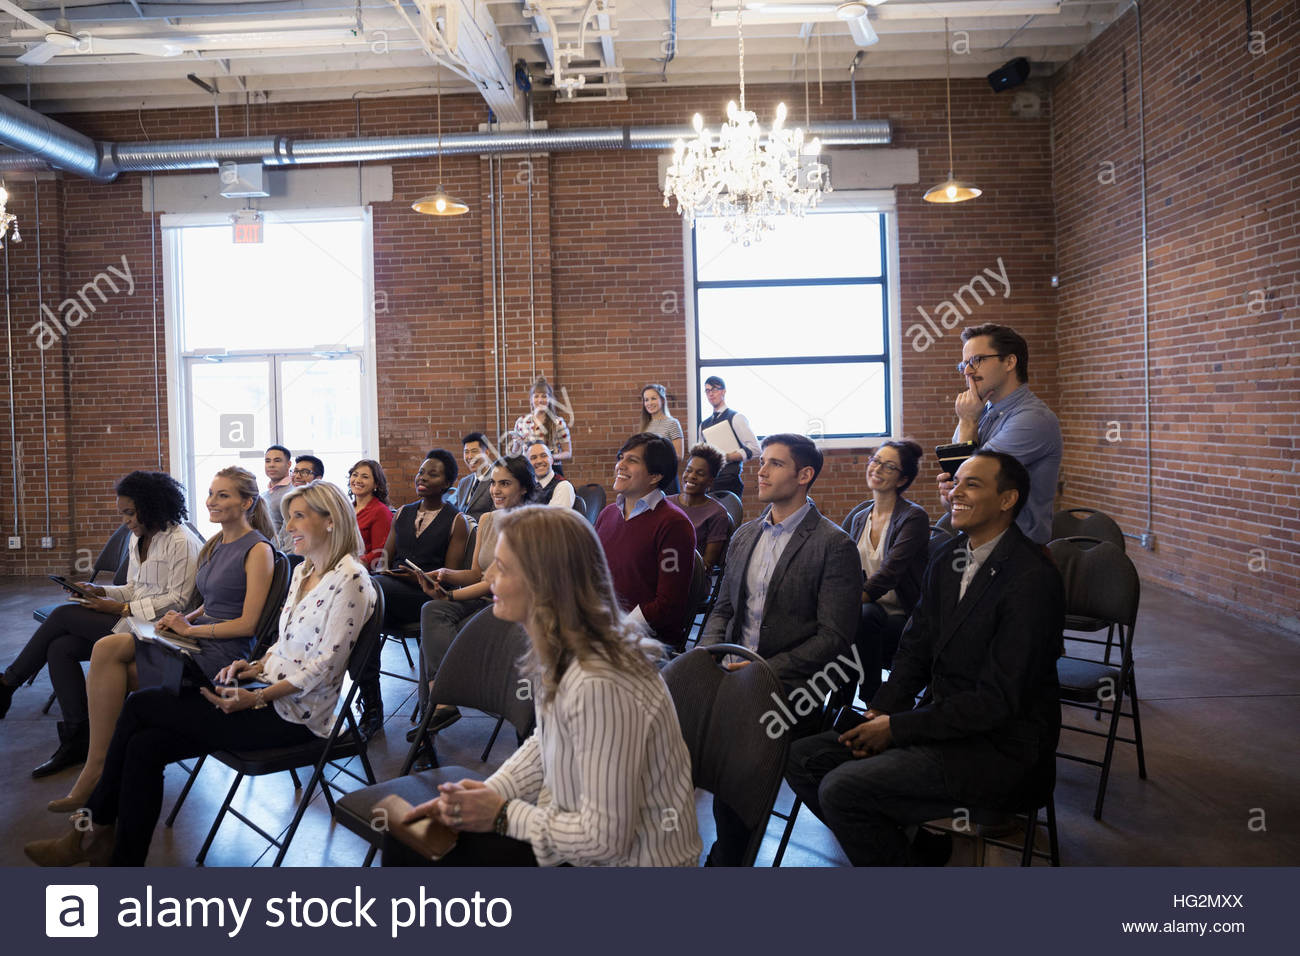 Business people in conference room audience Stock Photo